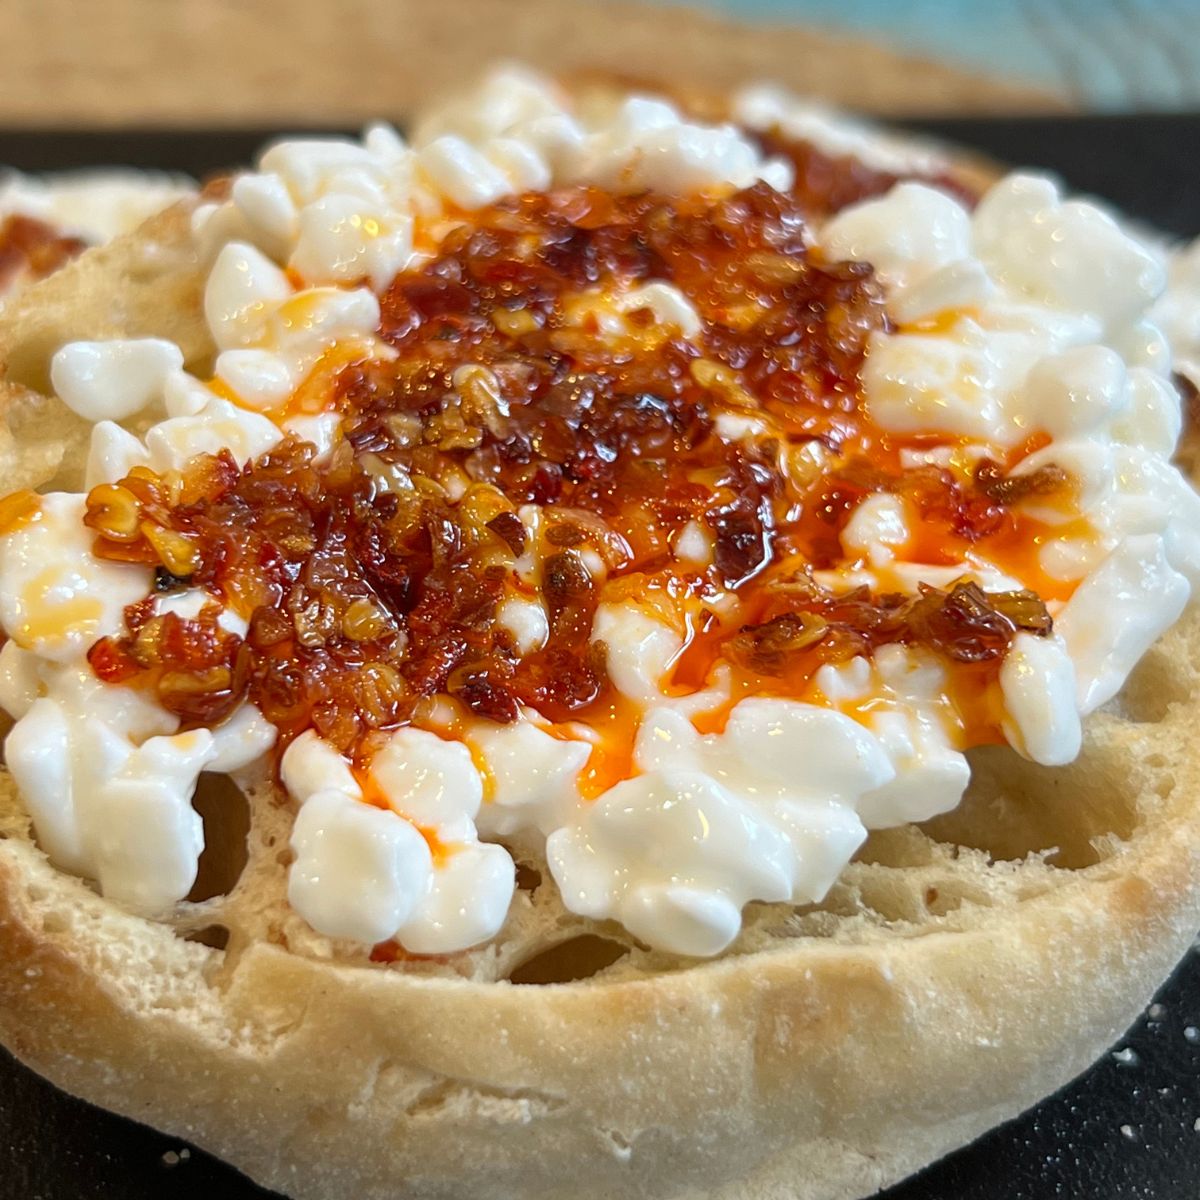 Chili Onion Crunch on an English Muffin with Cottage Cheese